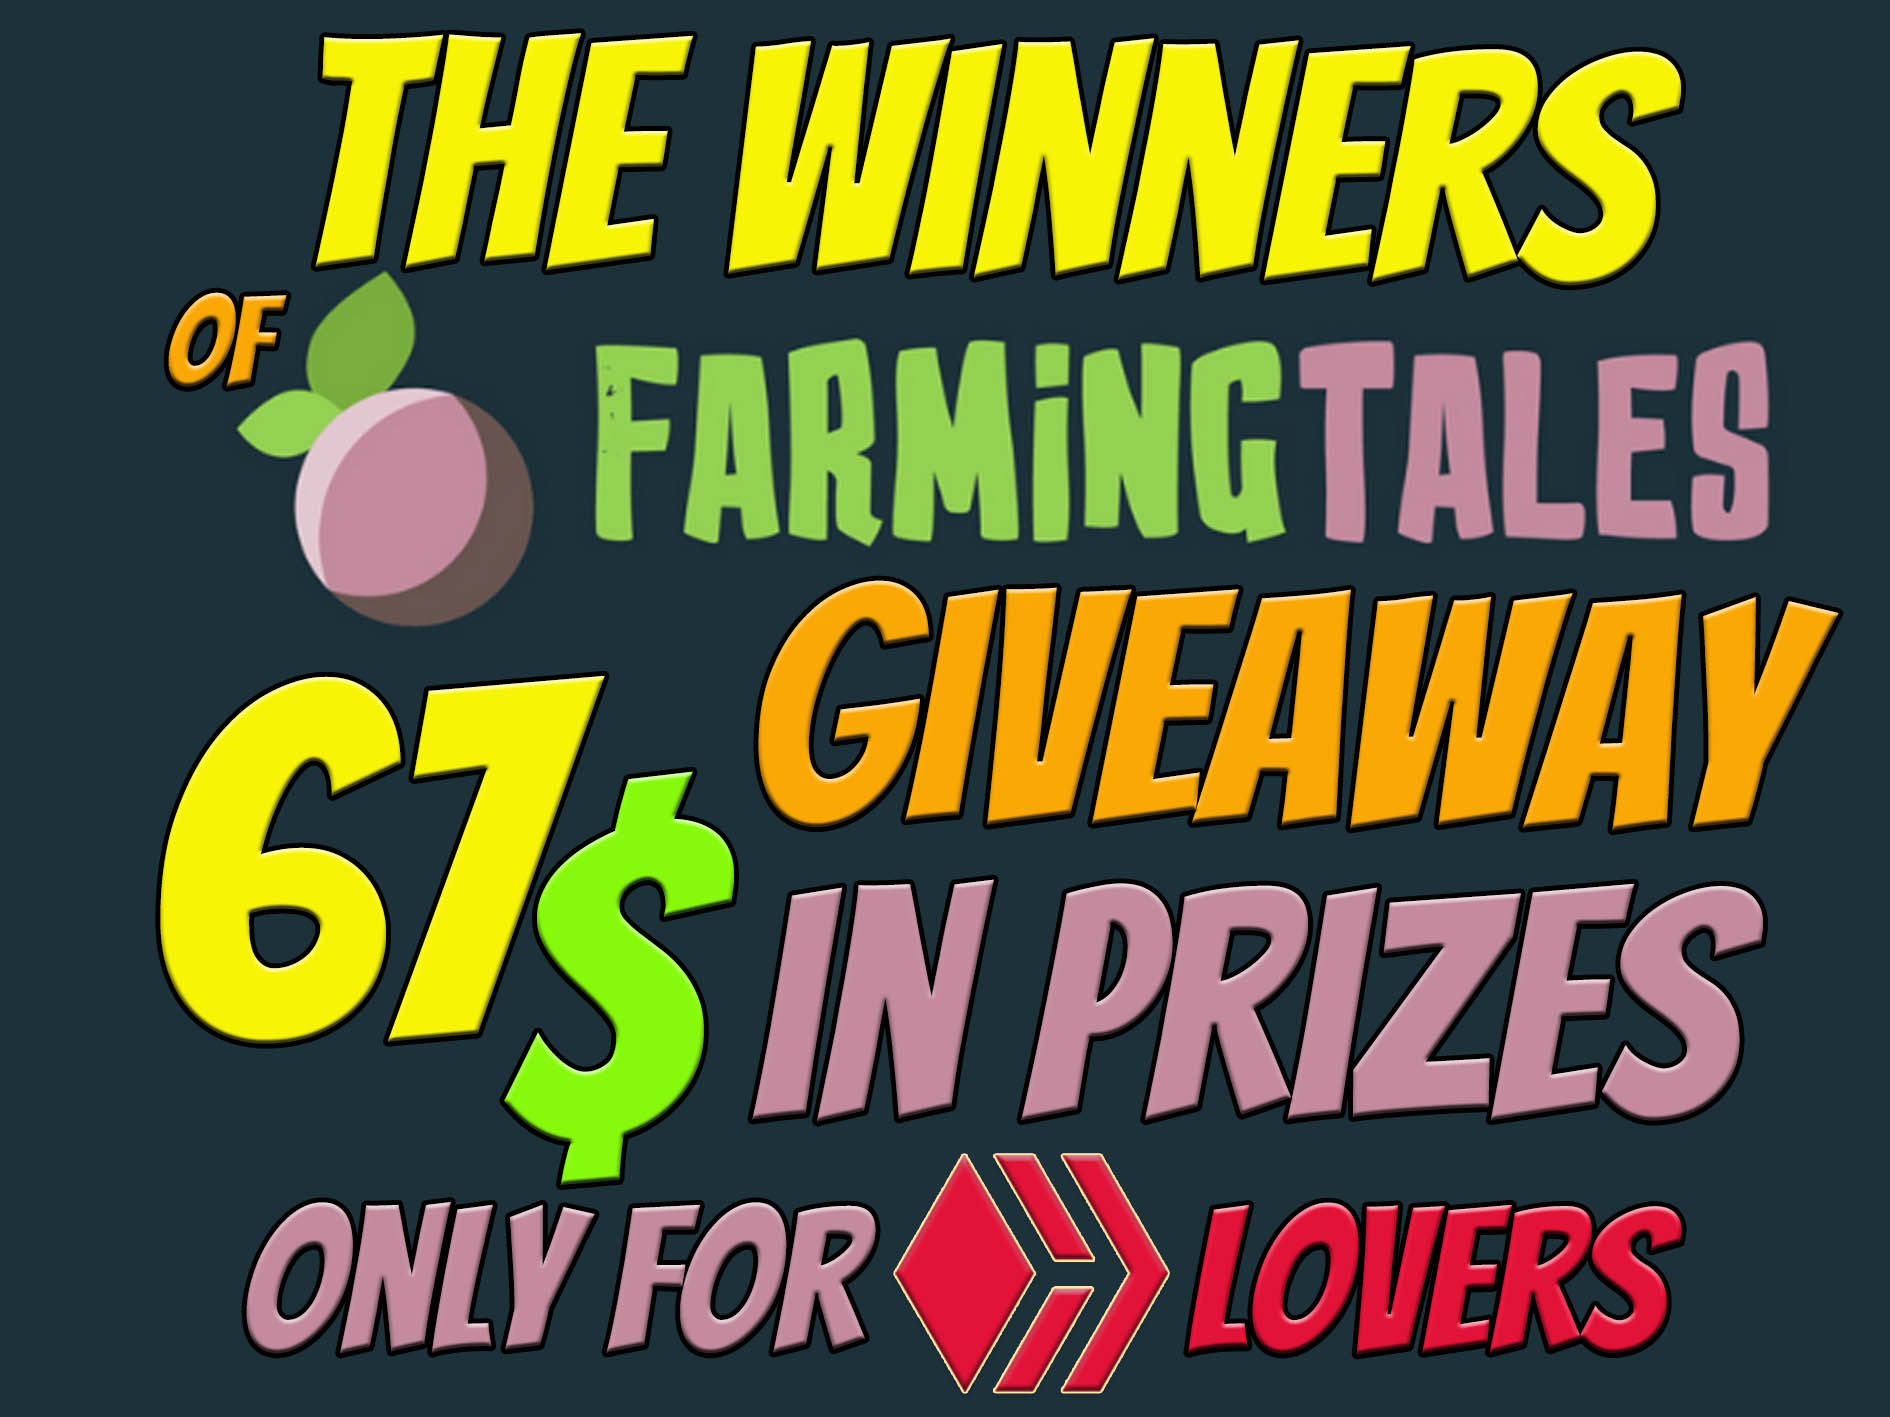 @libertycrypto27/the-winners-of-farming-tales-giveaway-dollar67-in-prizes-for-3-lucky-hive-lovers-engita